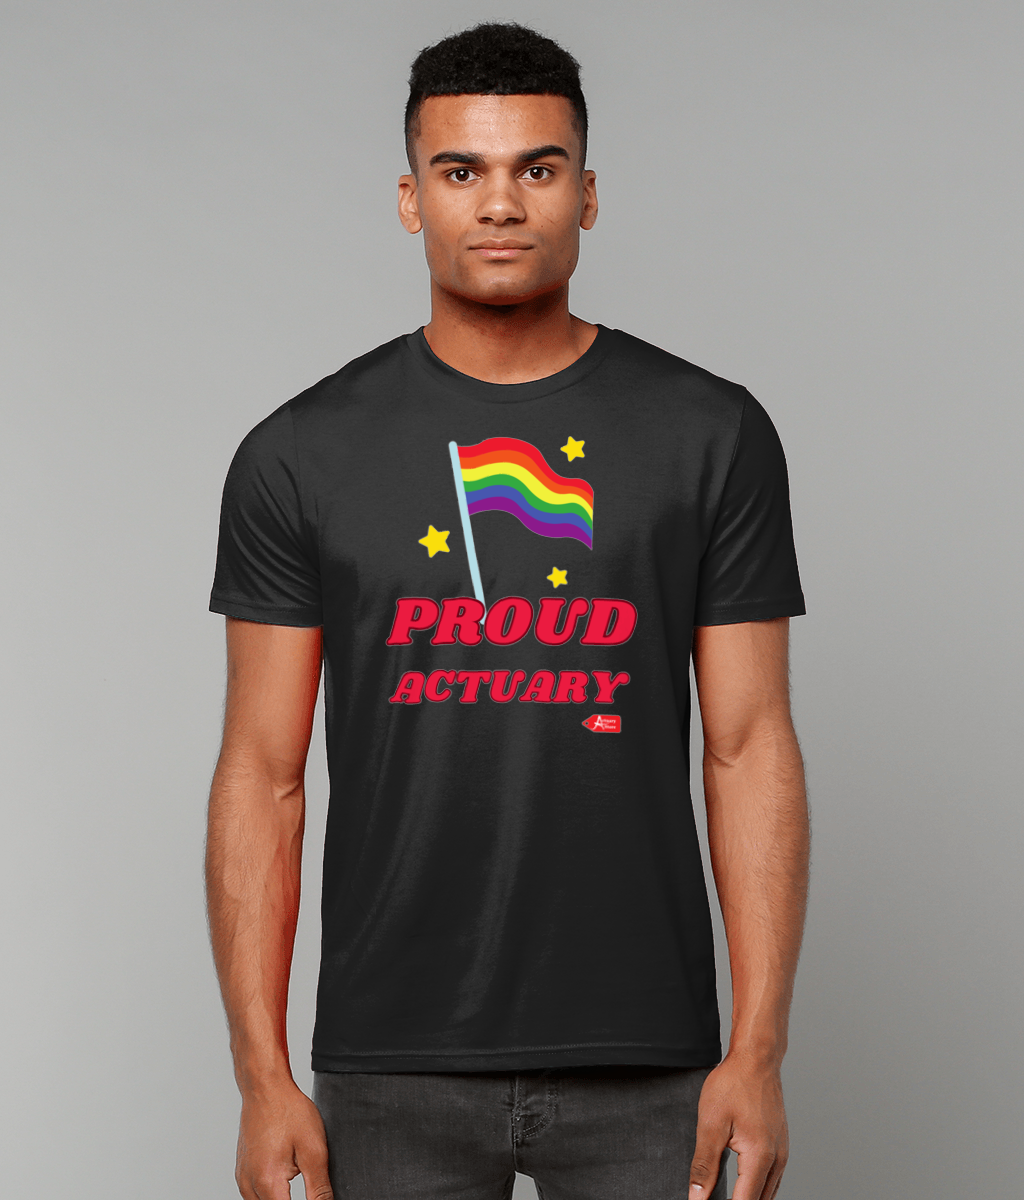 Proud Actuary Rainbow Flag Stars T-Shirt (Black and White Variants)